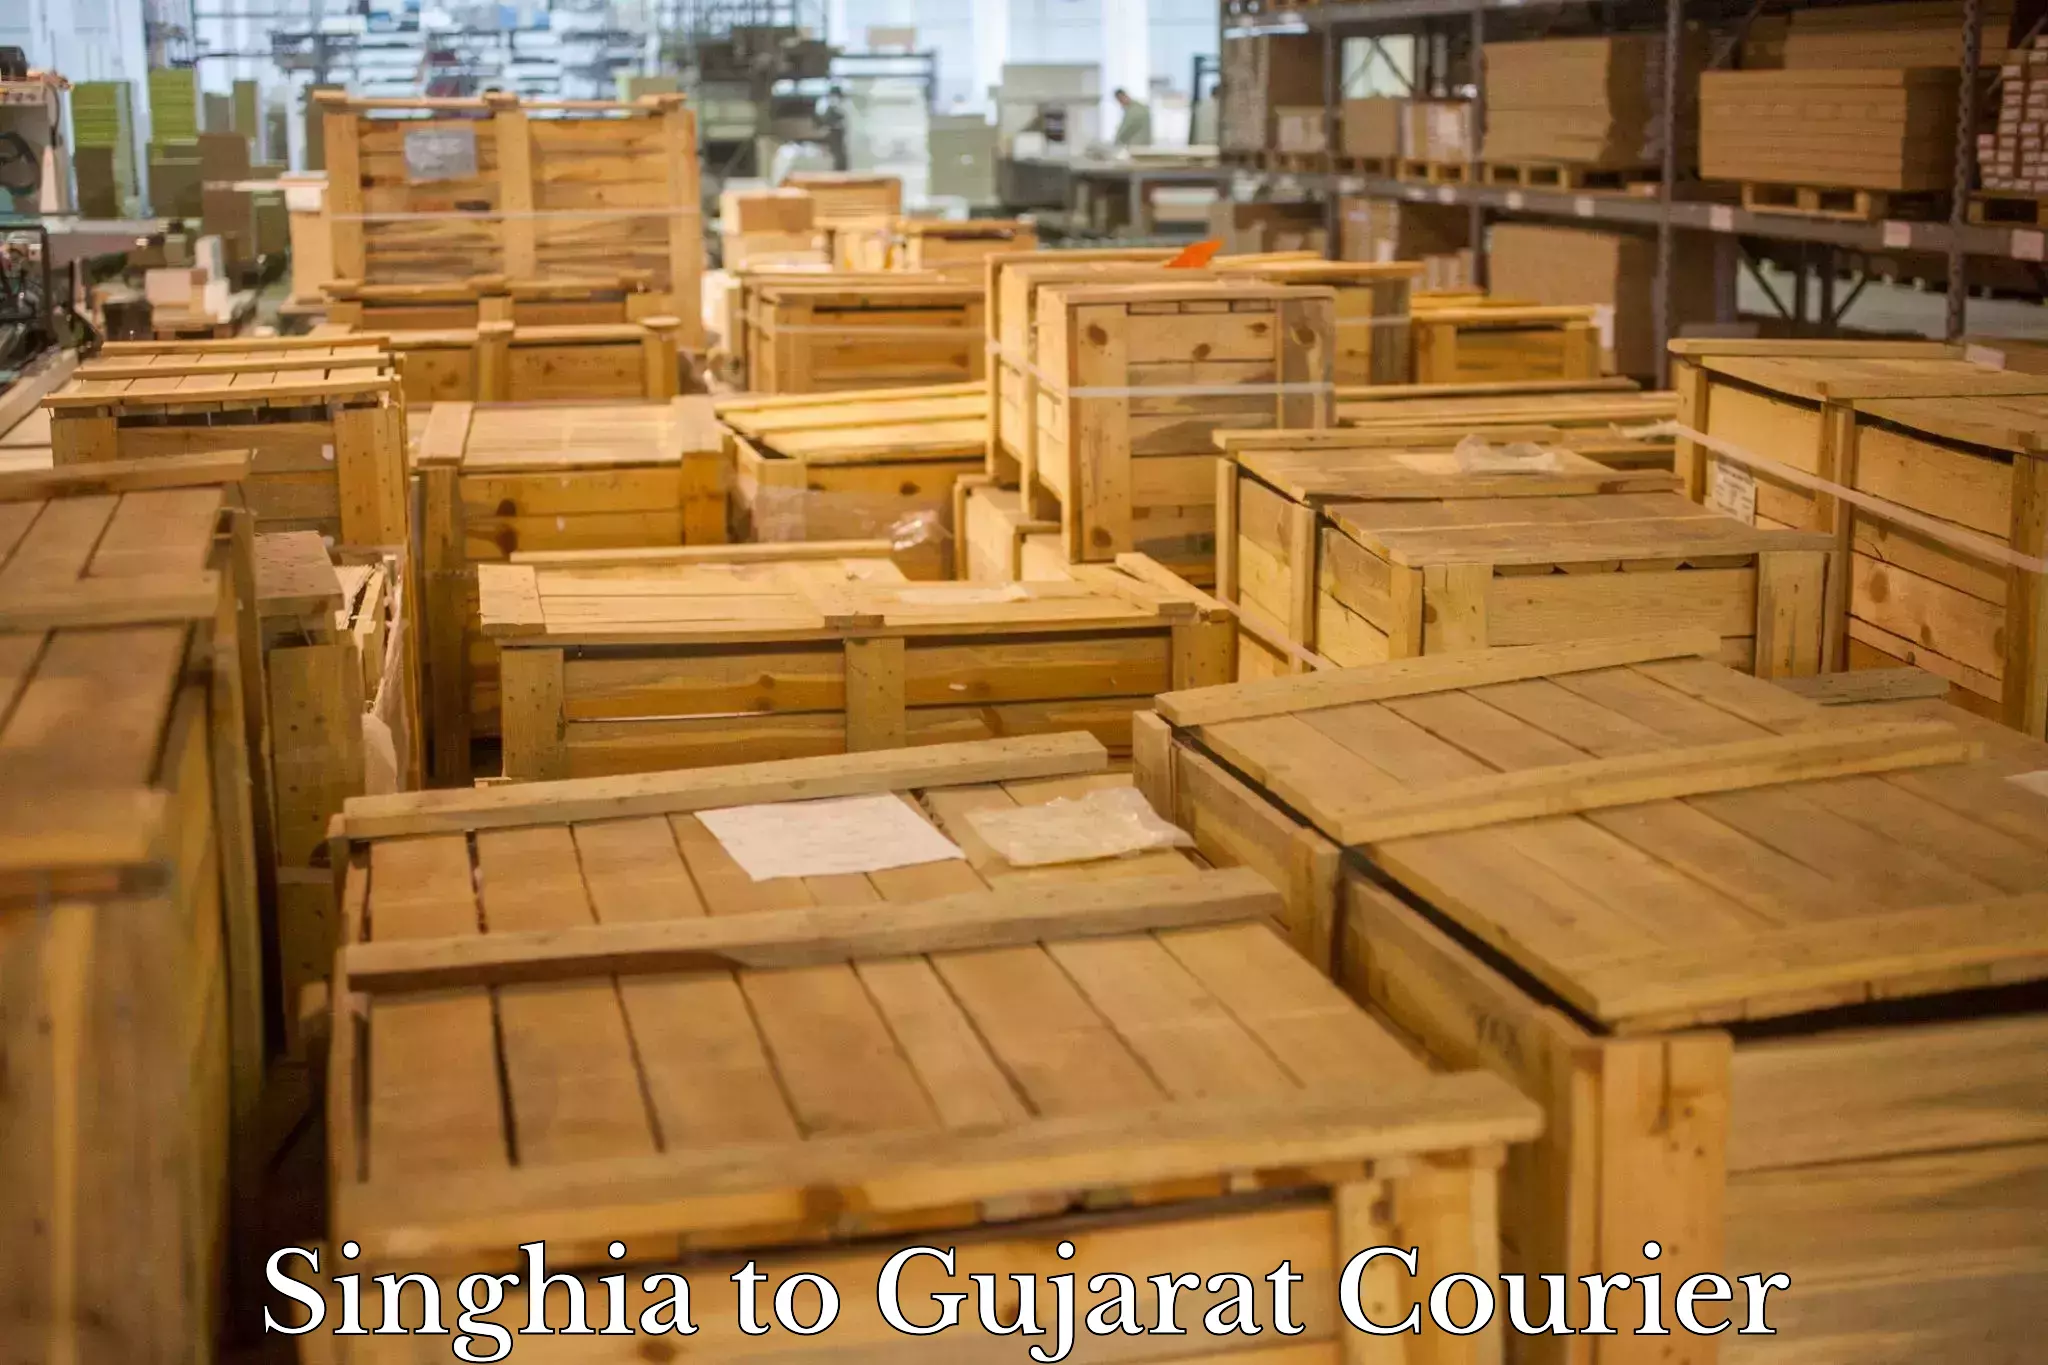 International courier networks Singhia to Gujarat